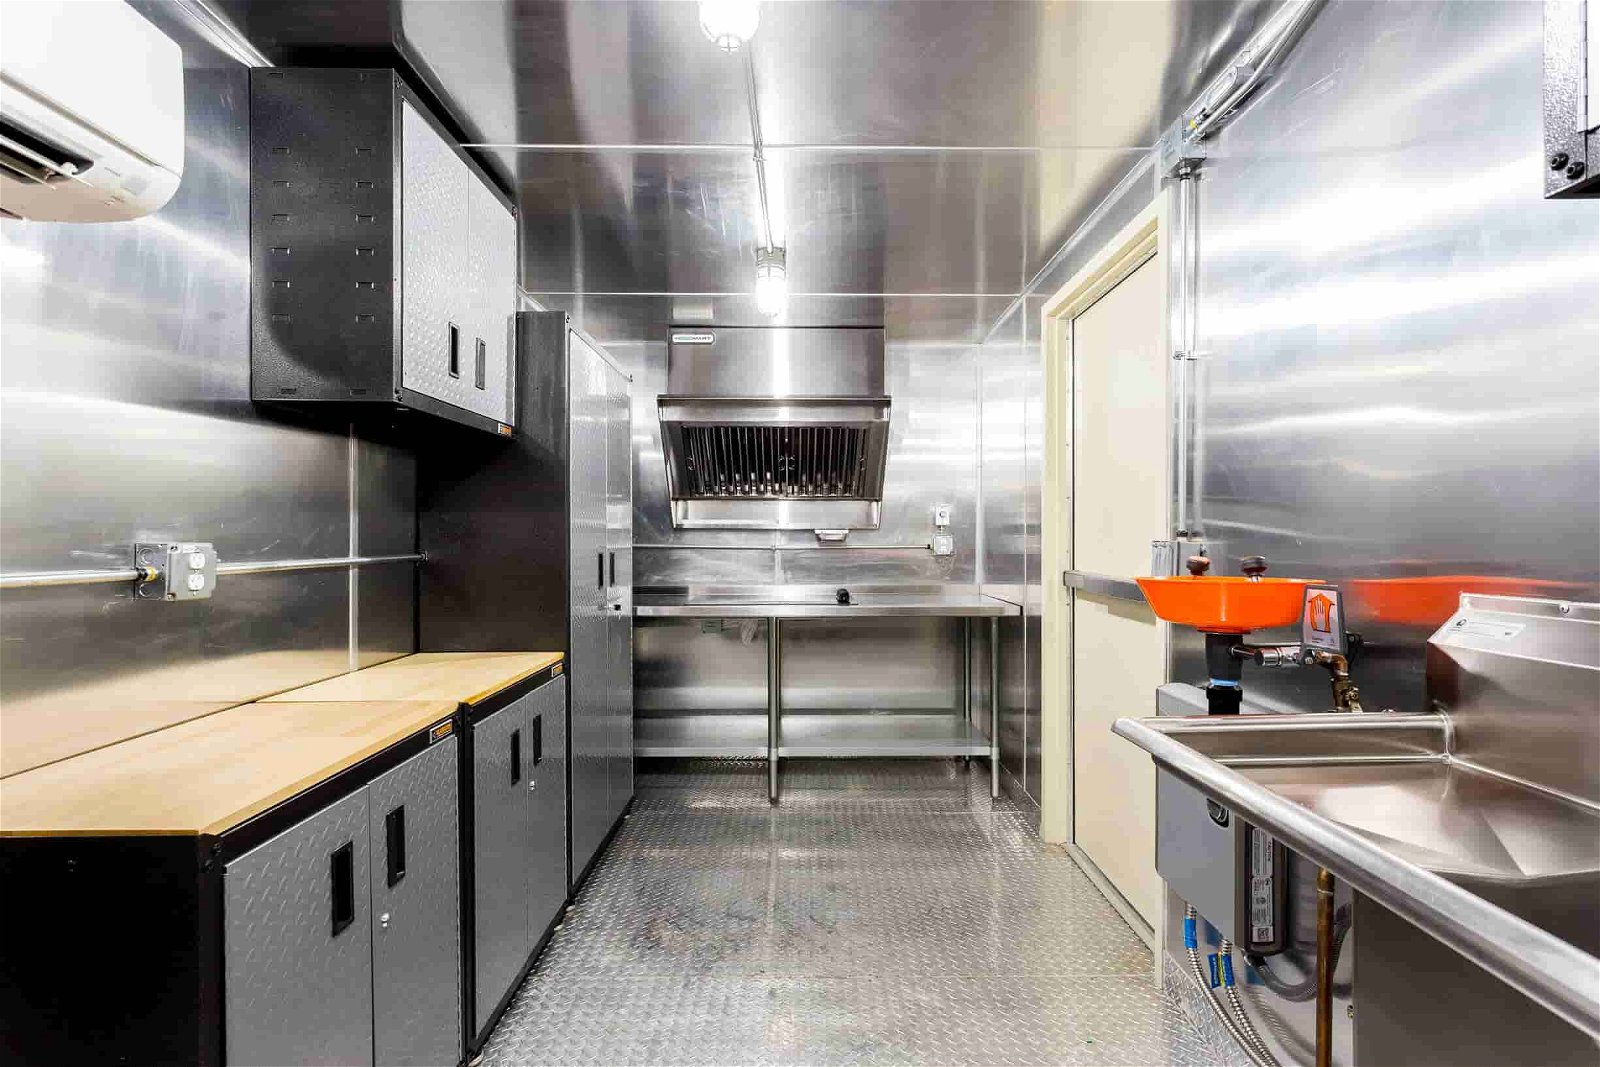 Shipping Container Kitchen - Container Modifications - CMG